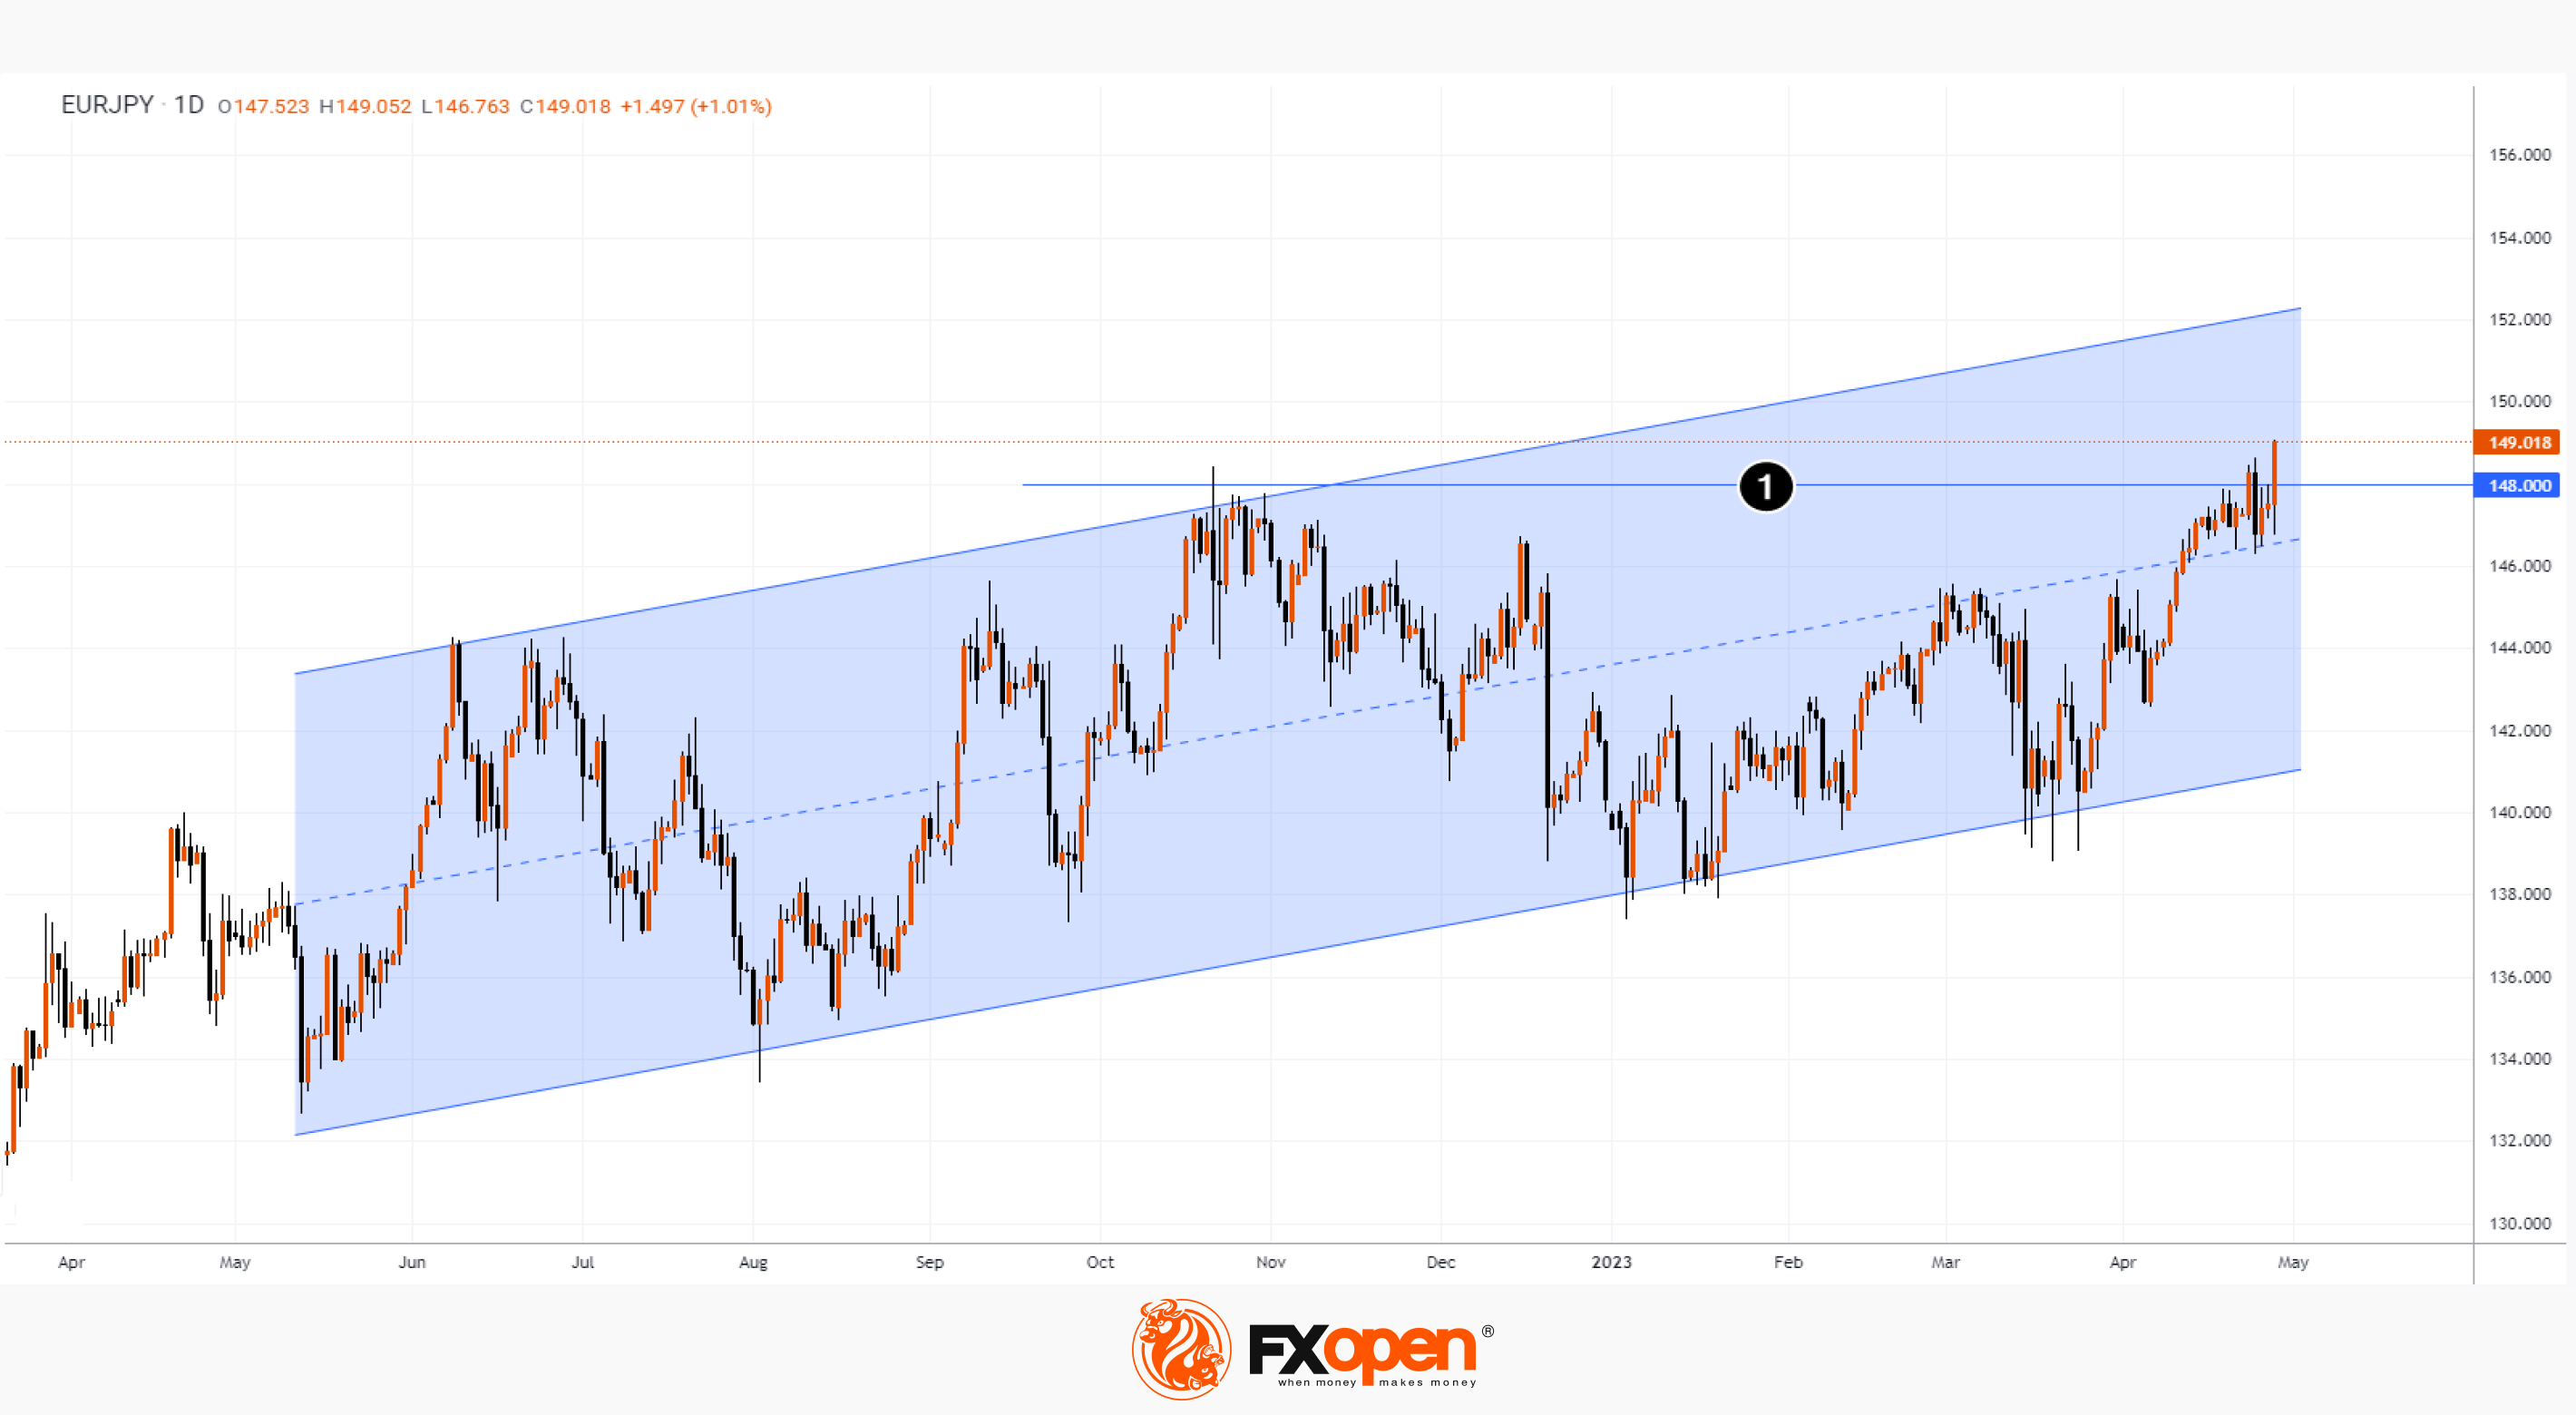 Market Analysis: EURJPY Climbs to Its Highest in Over 8 Years